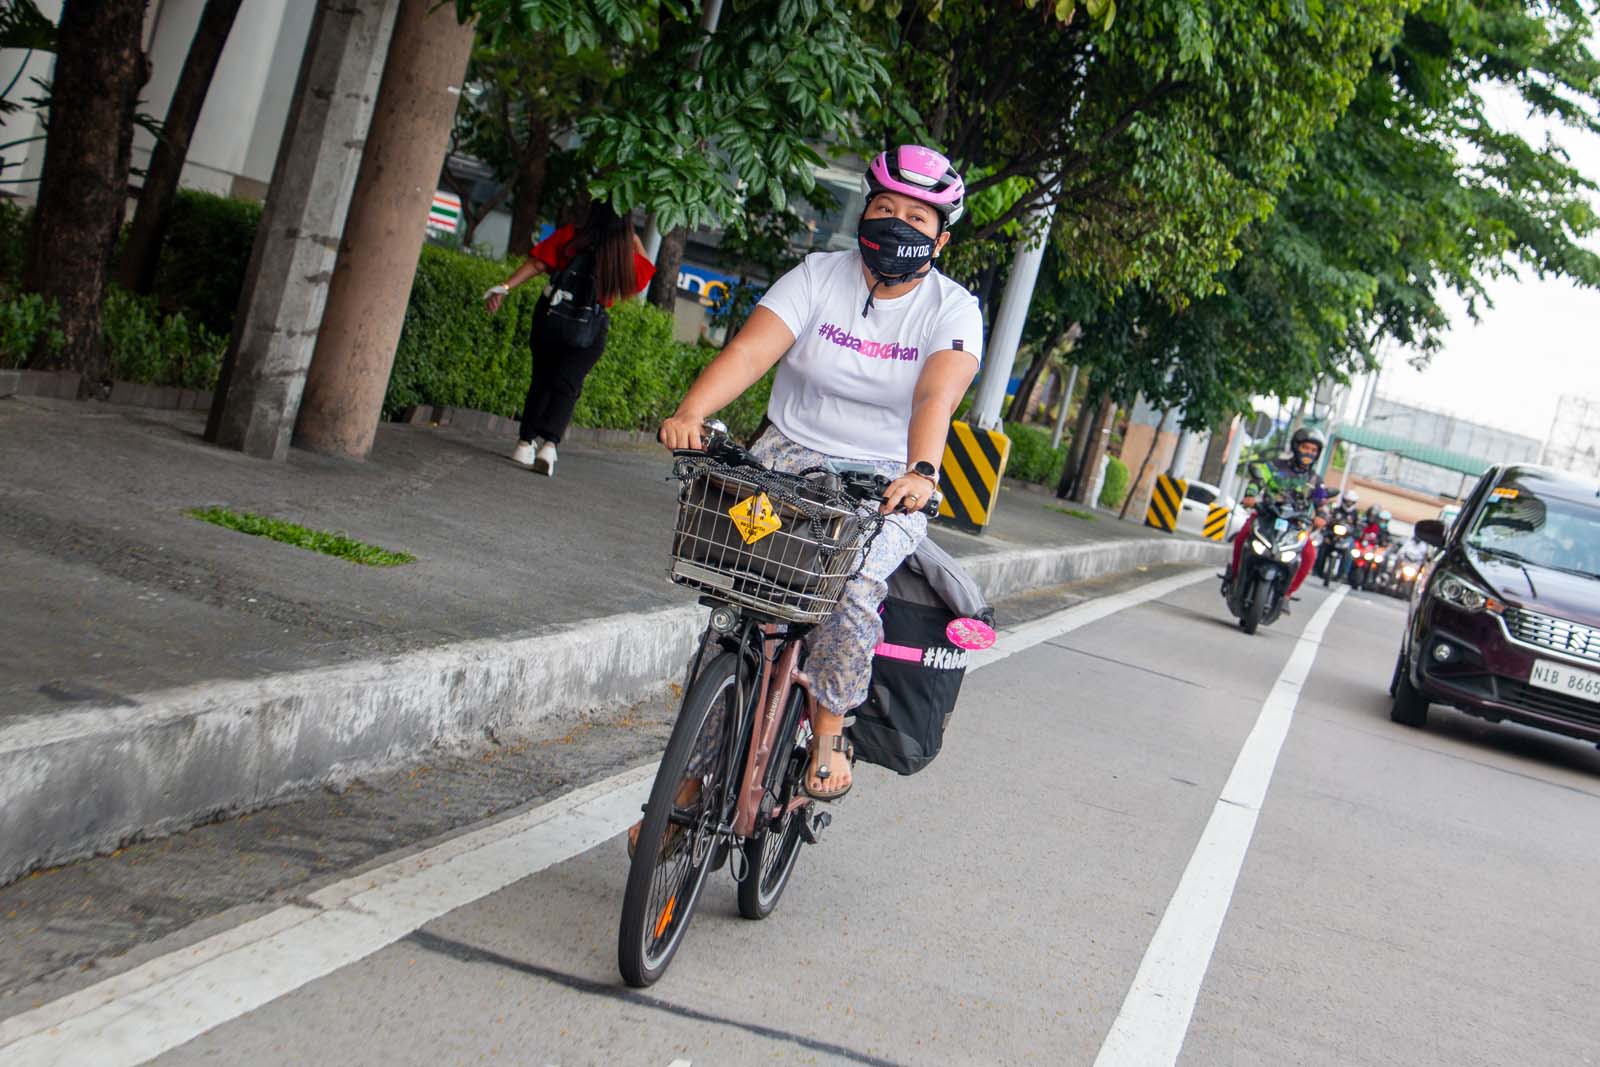 Even though she has been commuting by bike for nearly a decade, Jaramia Amarnani says she still gets frightened by aggressive drivers in Metro Manila, where bike lanes are often little more than painted lanes on the ground with no other protection for cyclists. Photo by Jhesset O. Enano